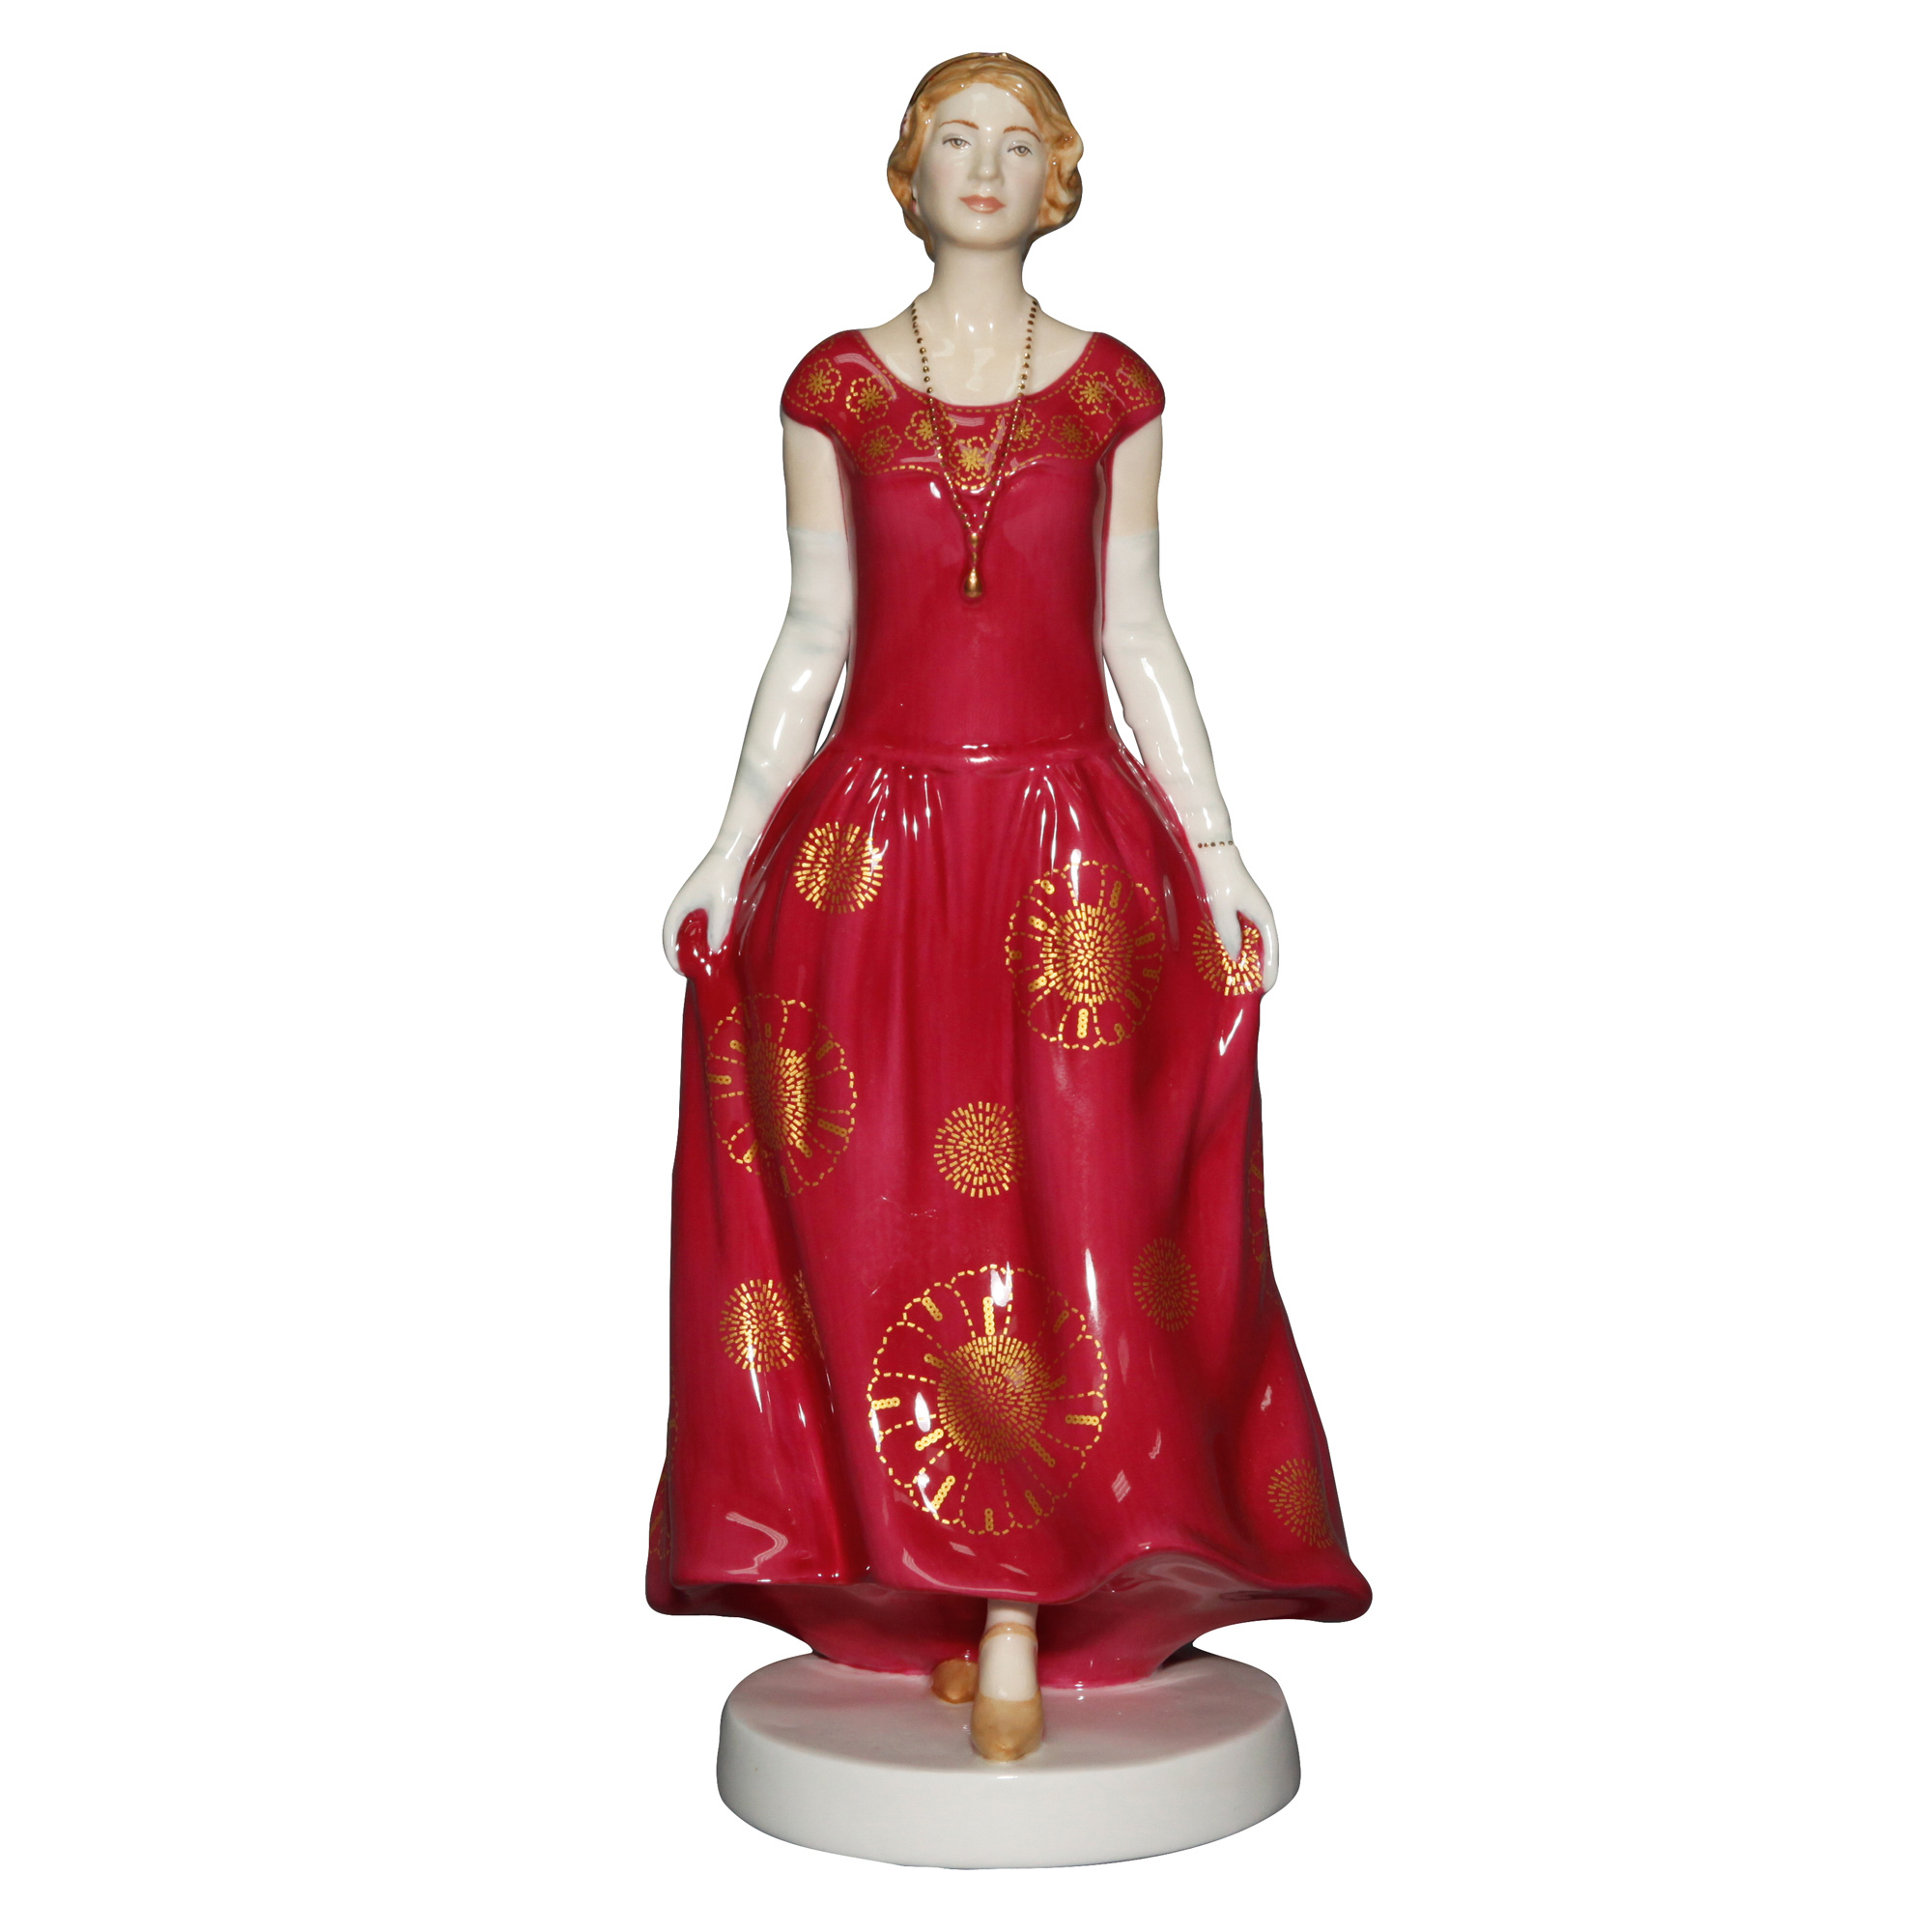 We Wish You A Merry Christmas Ornament HN5864 - Royal Doulton Figurine